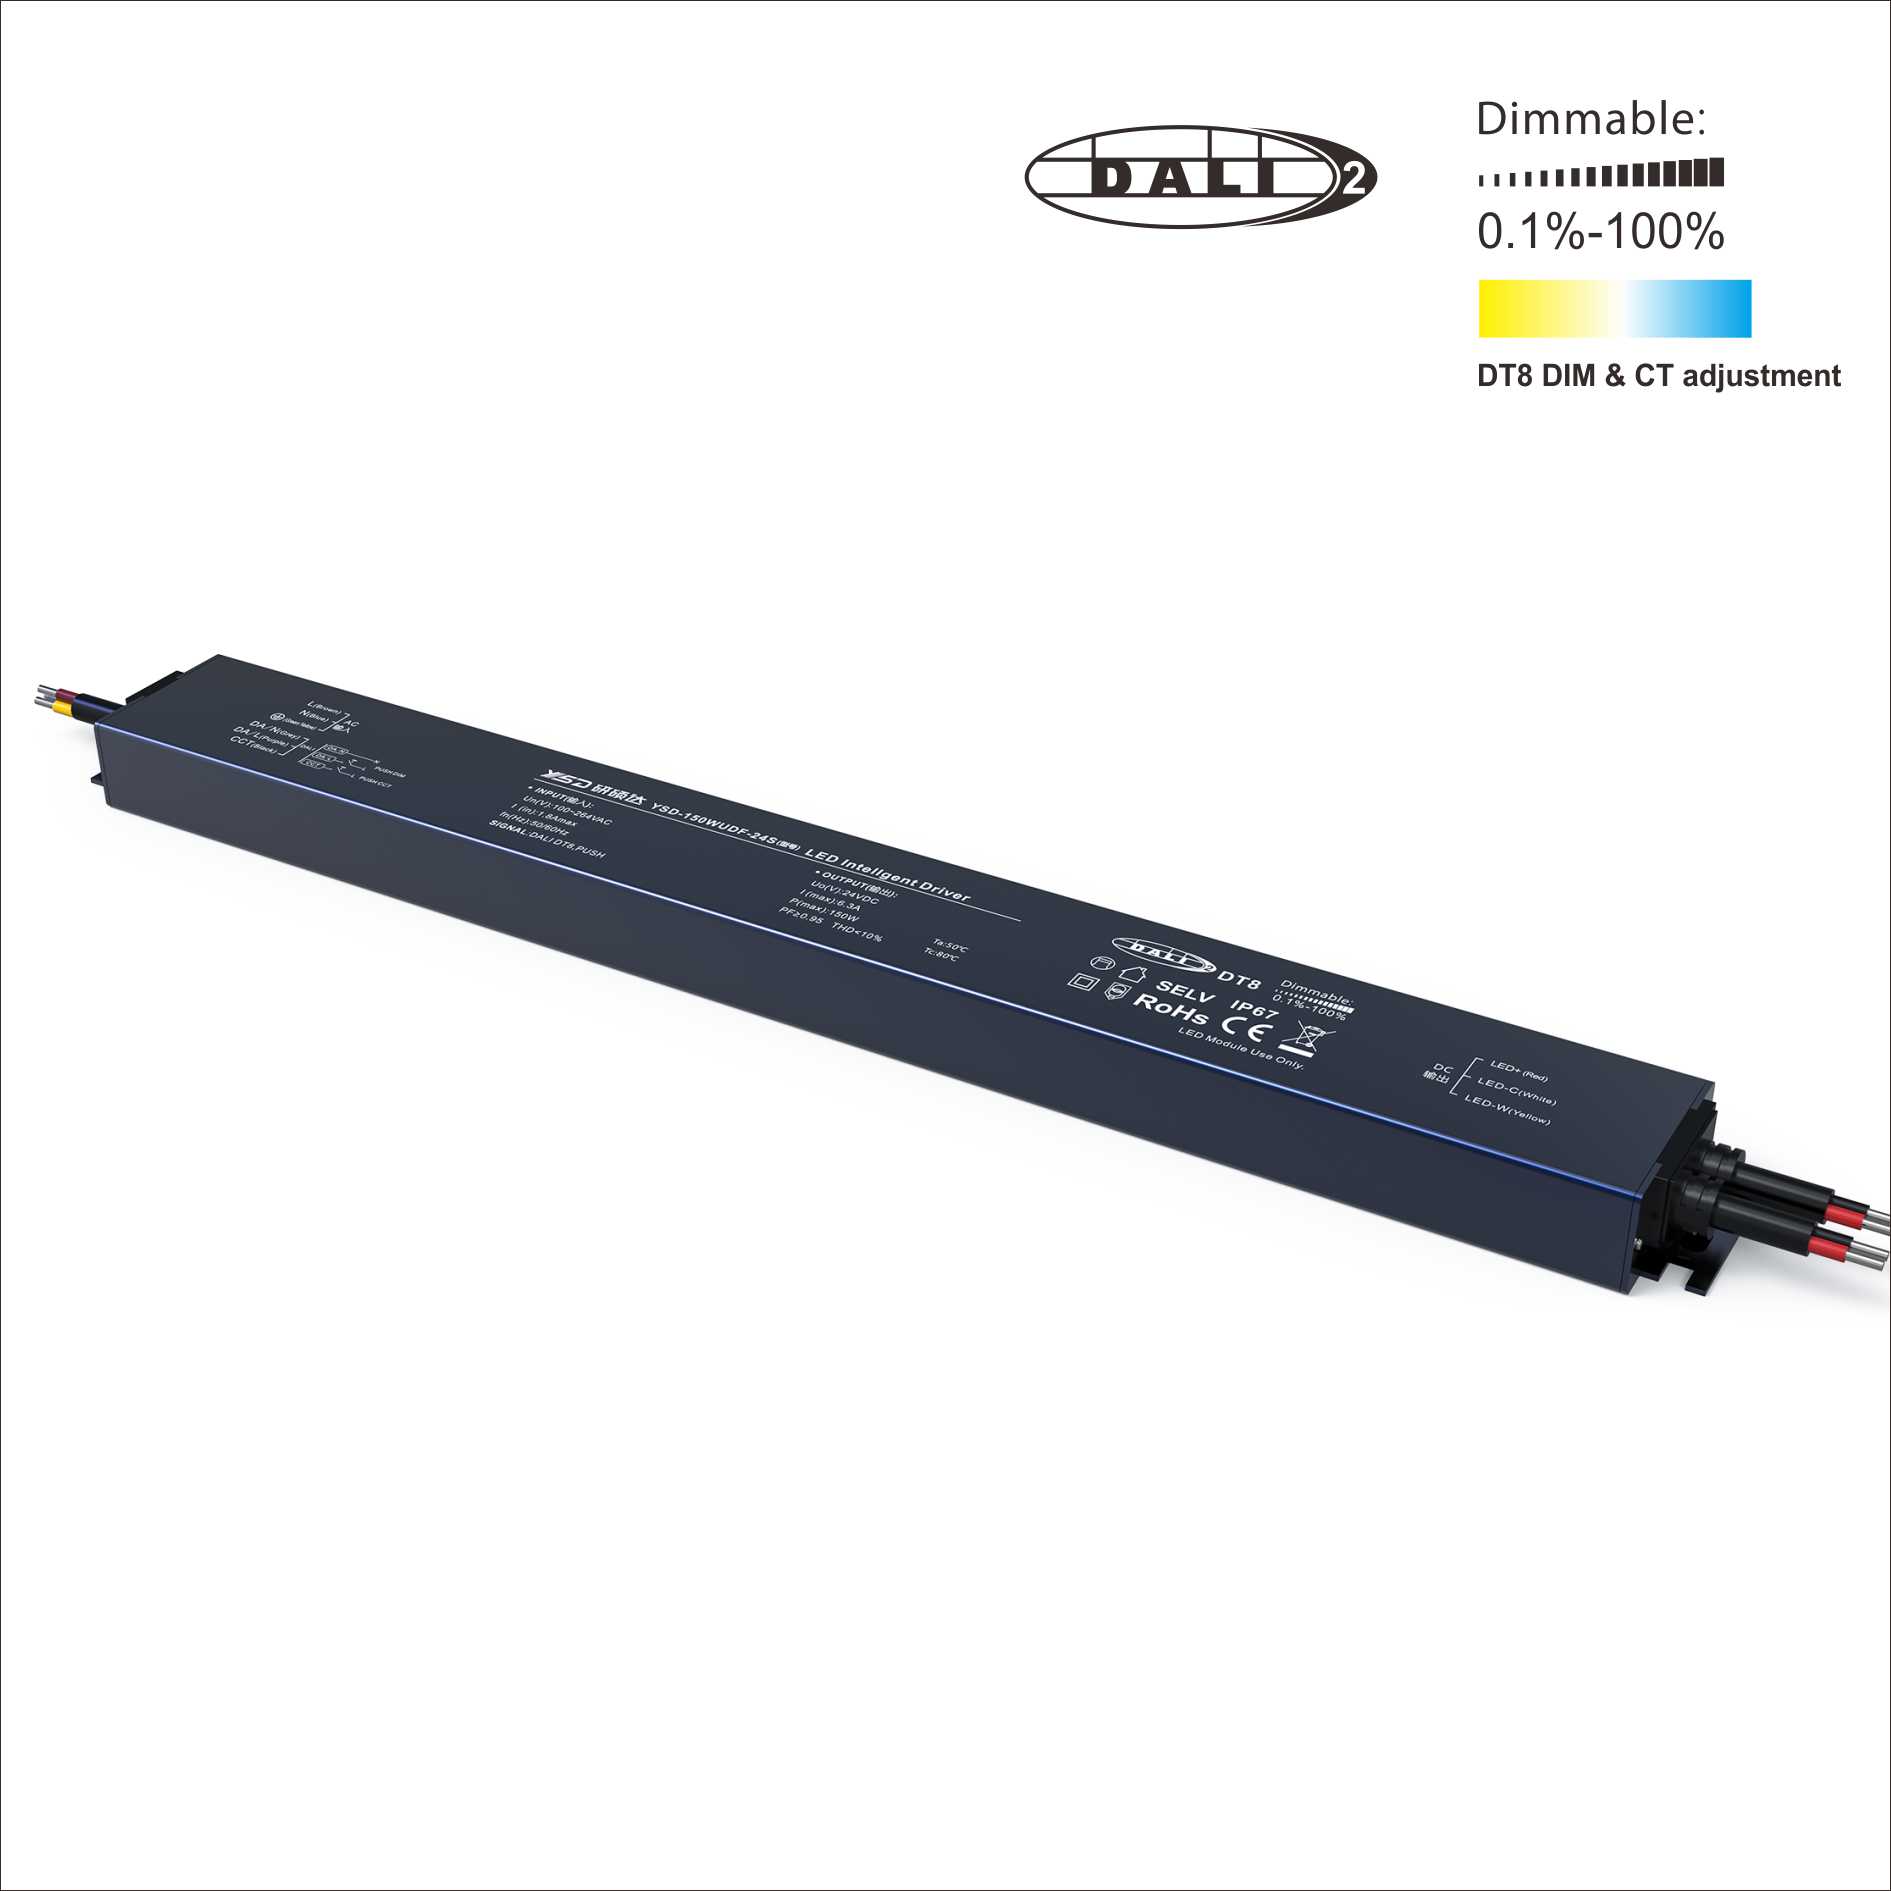 12/24V 150W DALI DT8 PUSH  Dimmable Waterproof LED Power Supply